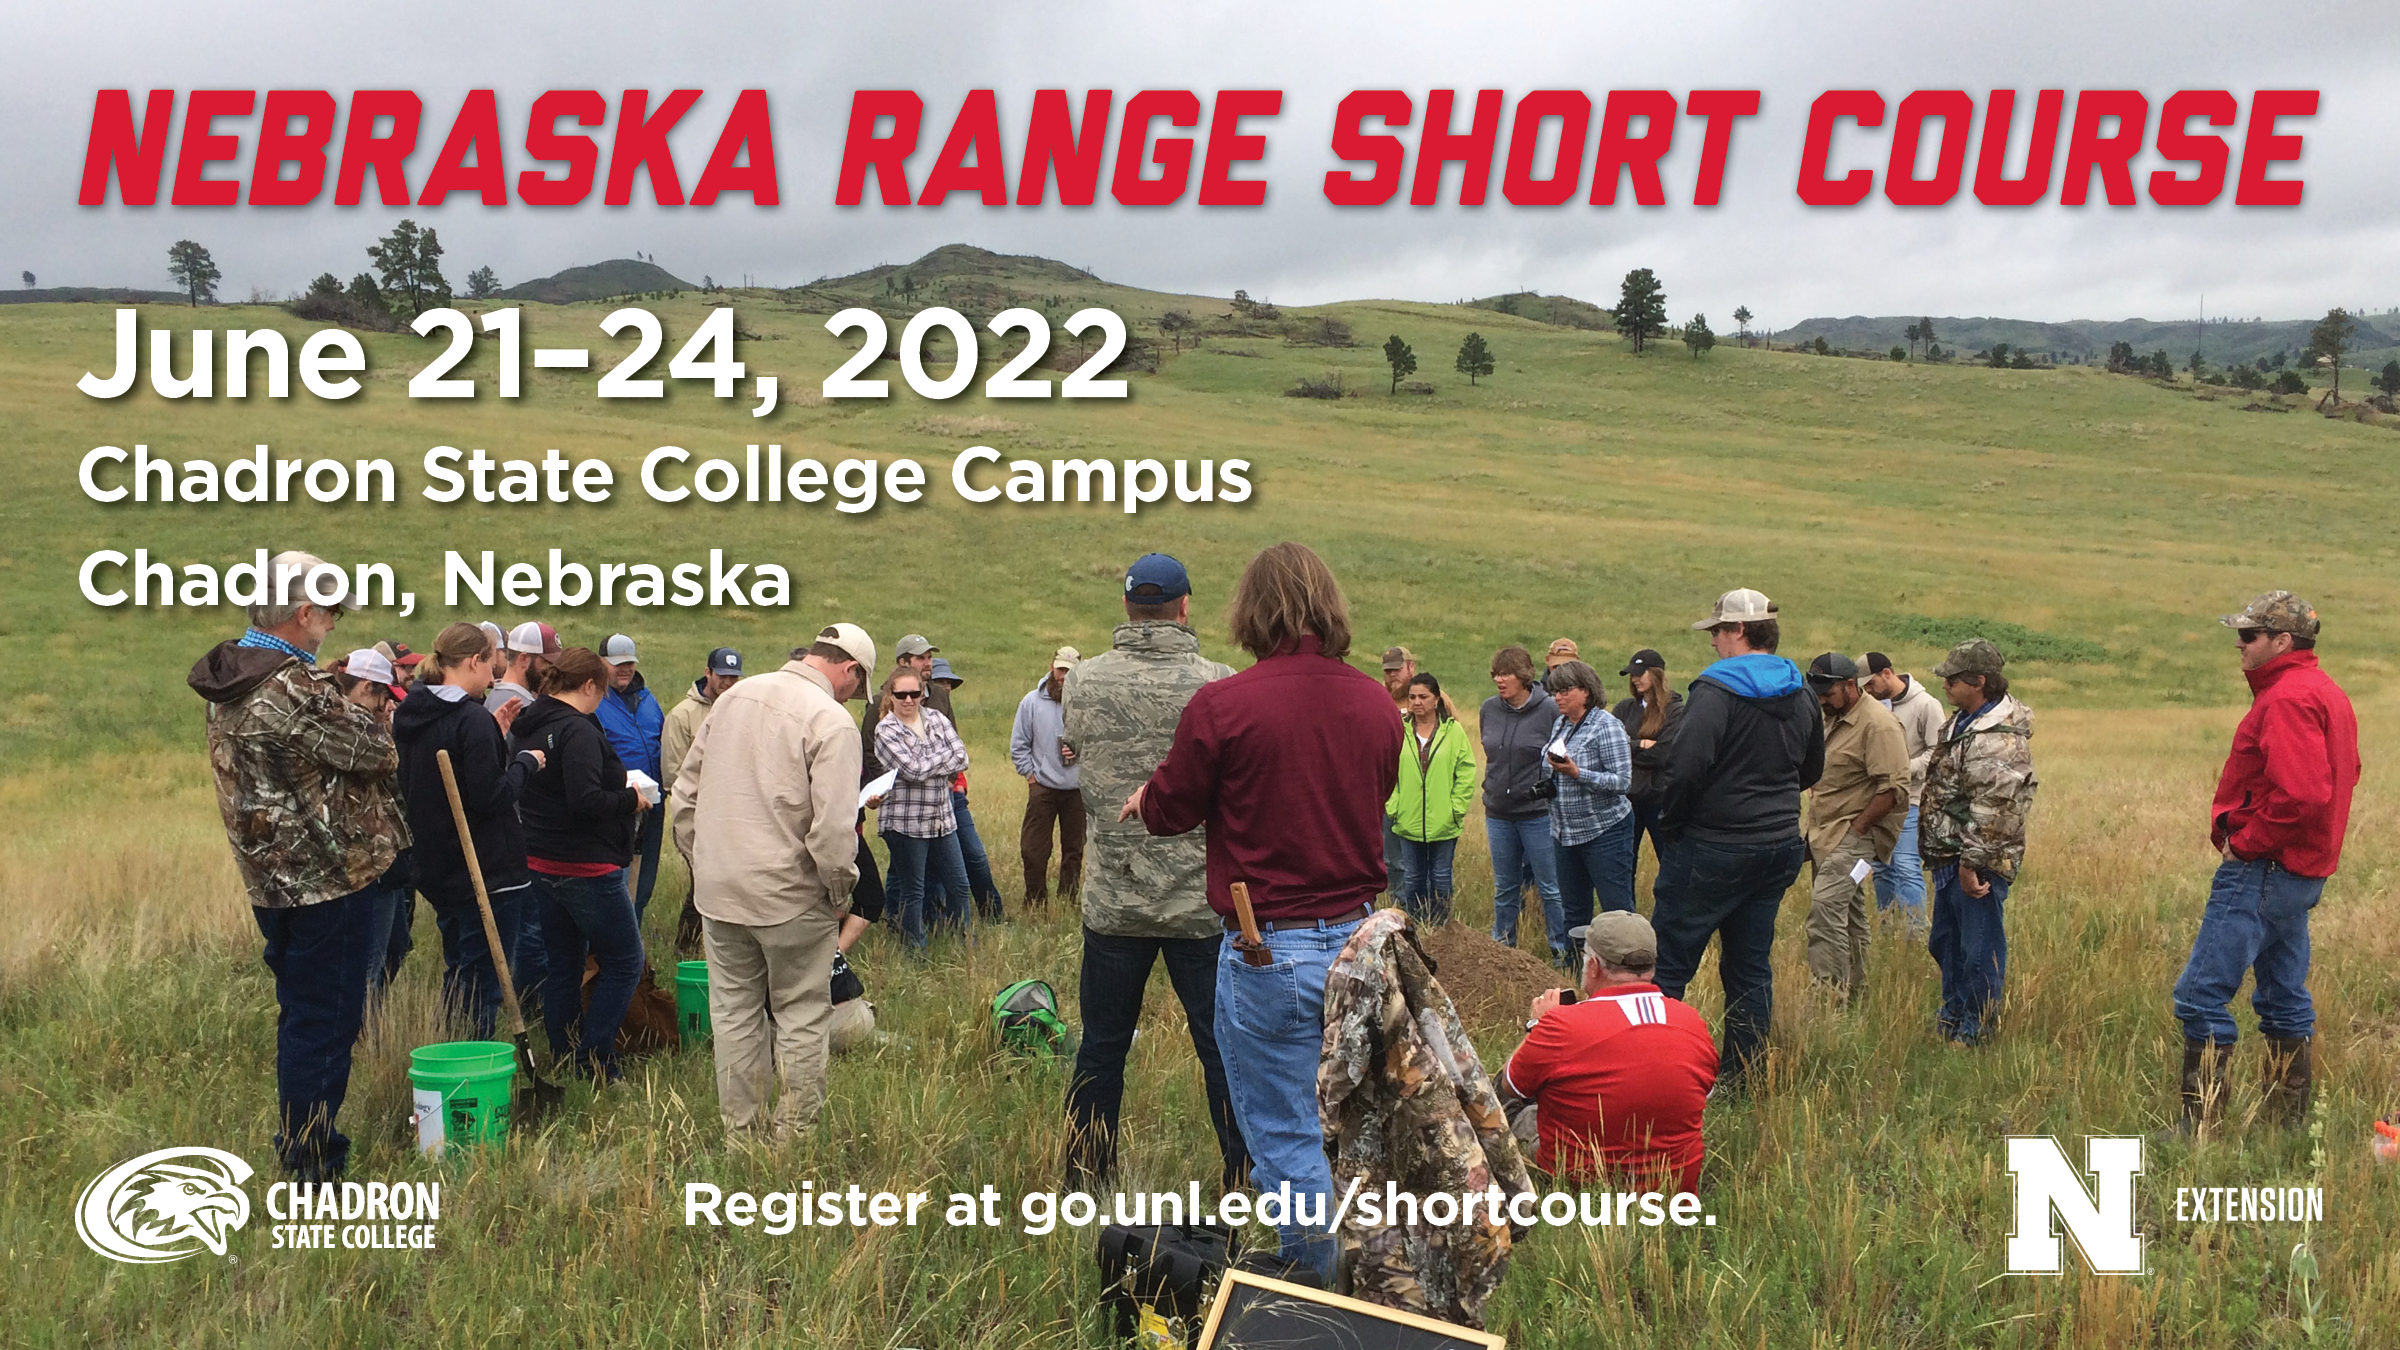 The Nebraska Range Short Course will be held at Chadron State College June 21–24.